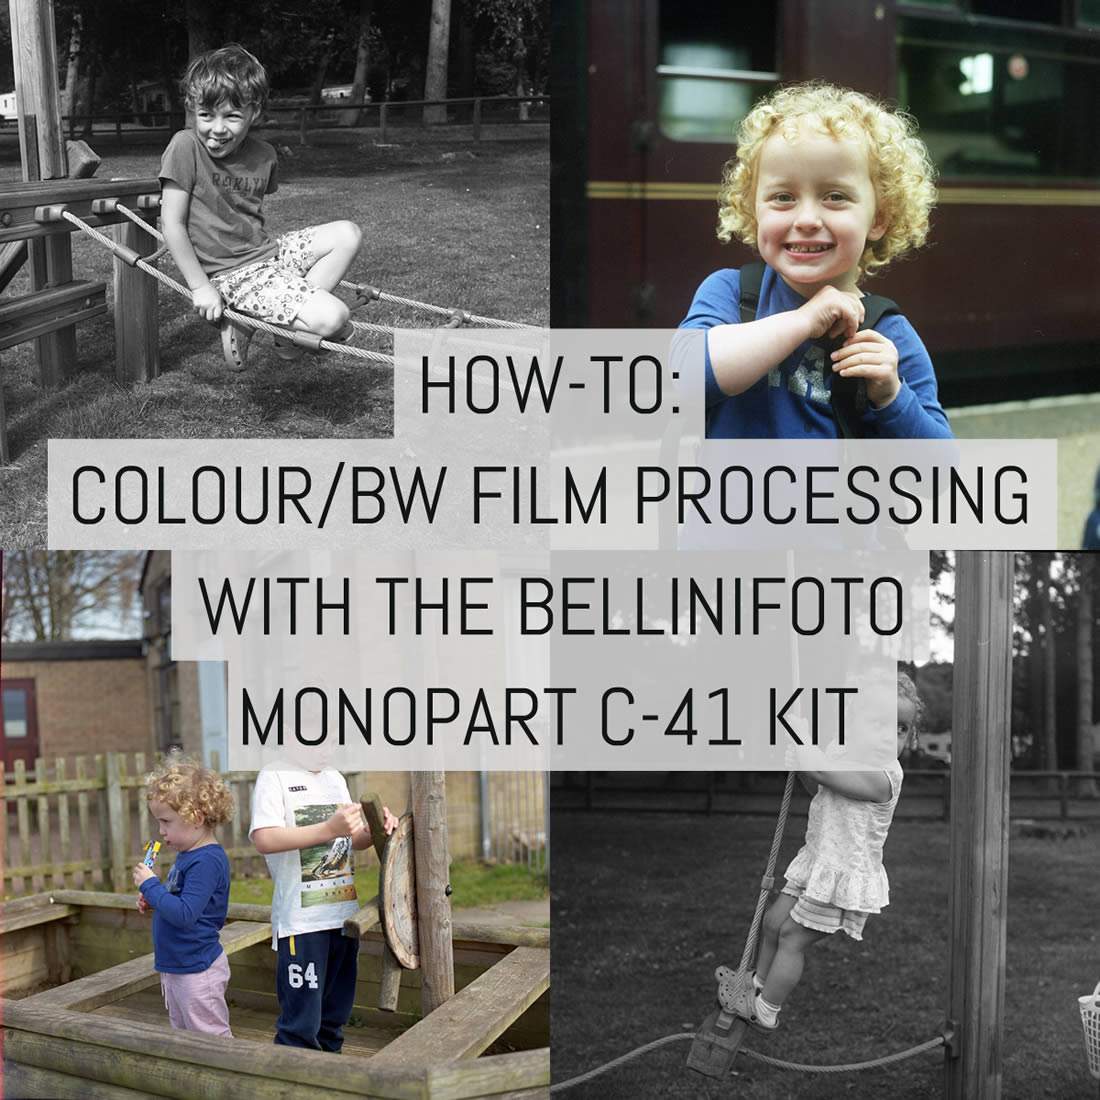 How-to: Colour/BW film processing with the BelliniFoto Monopart C-41 kit